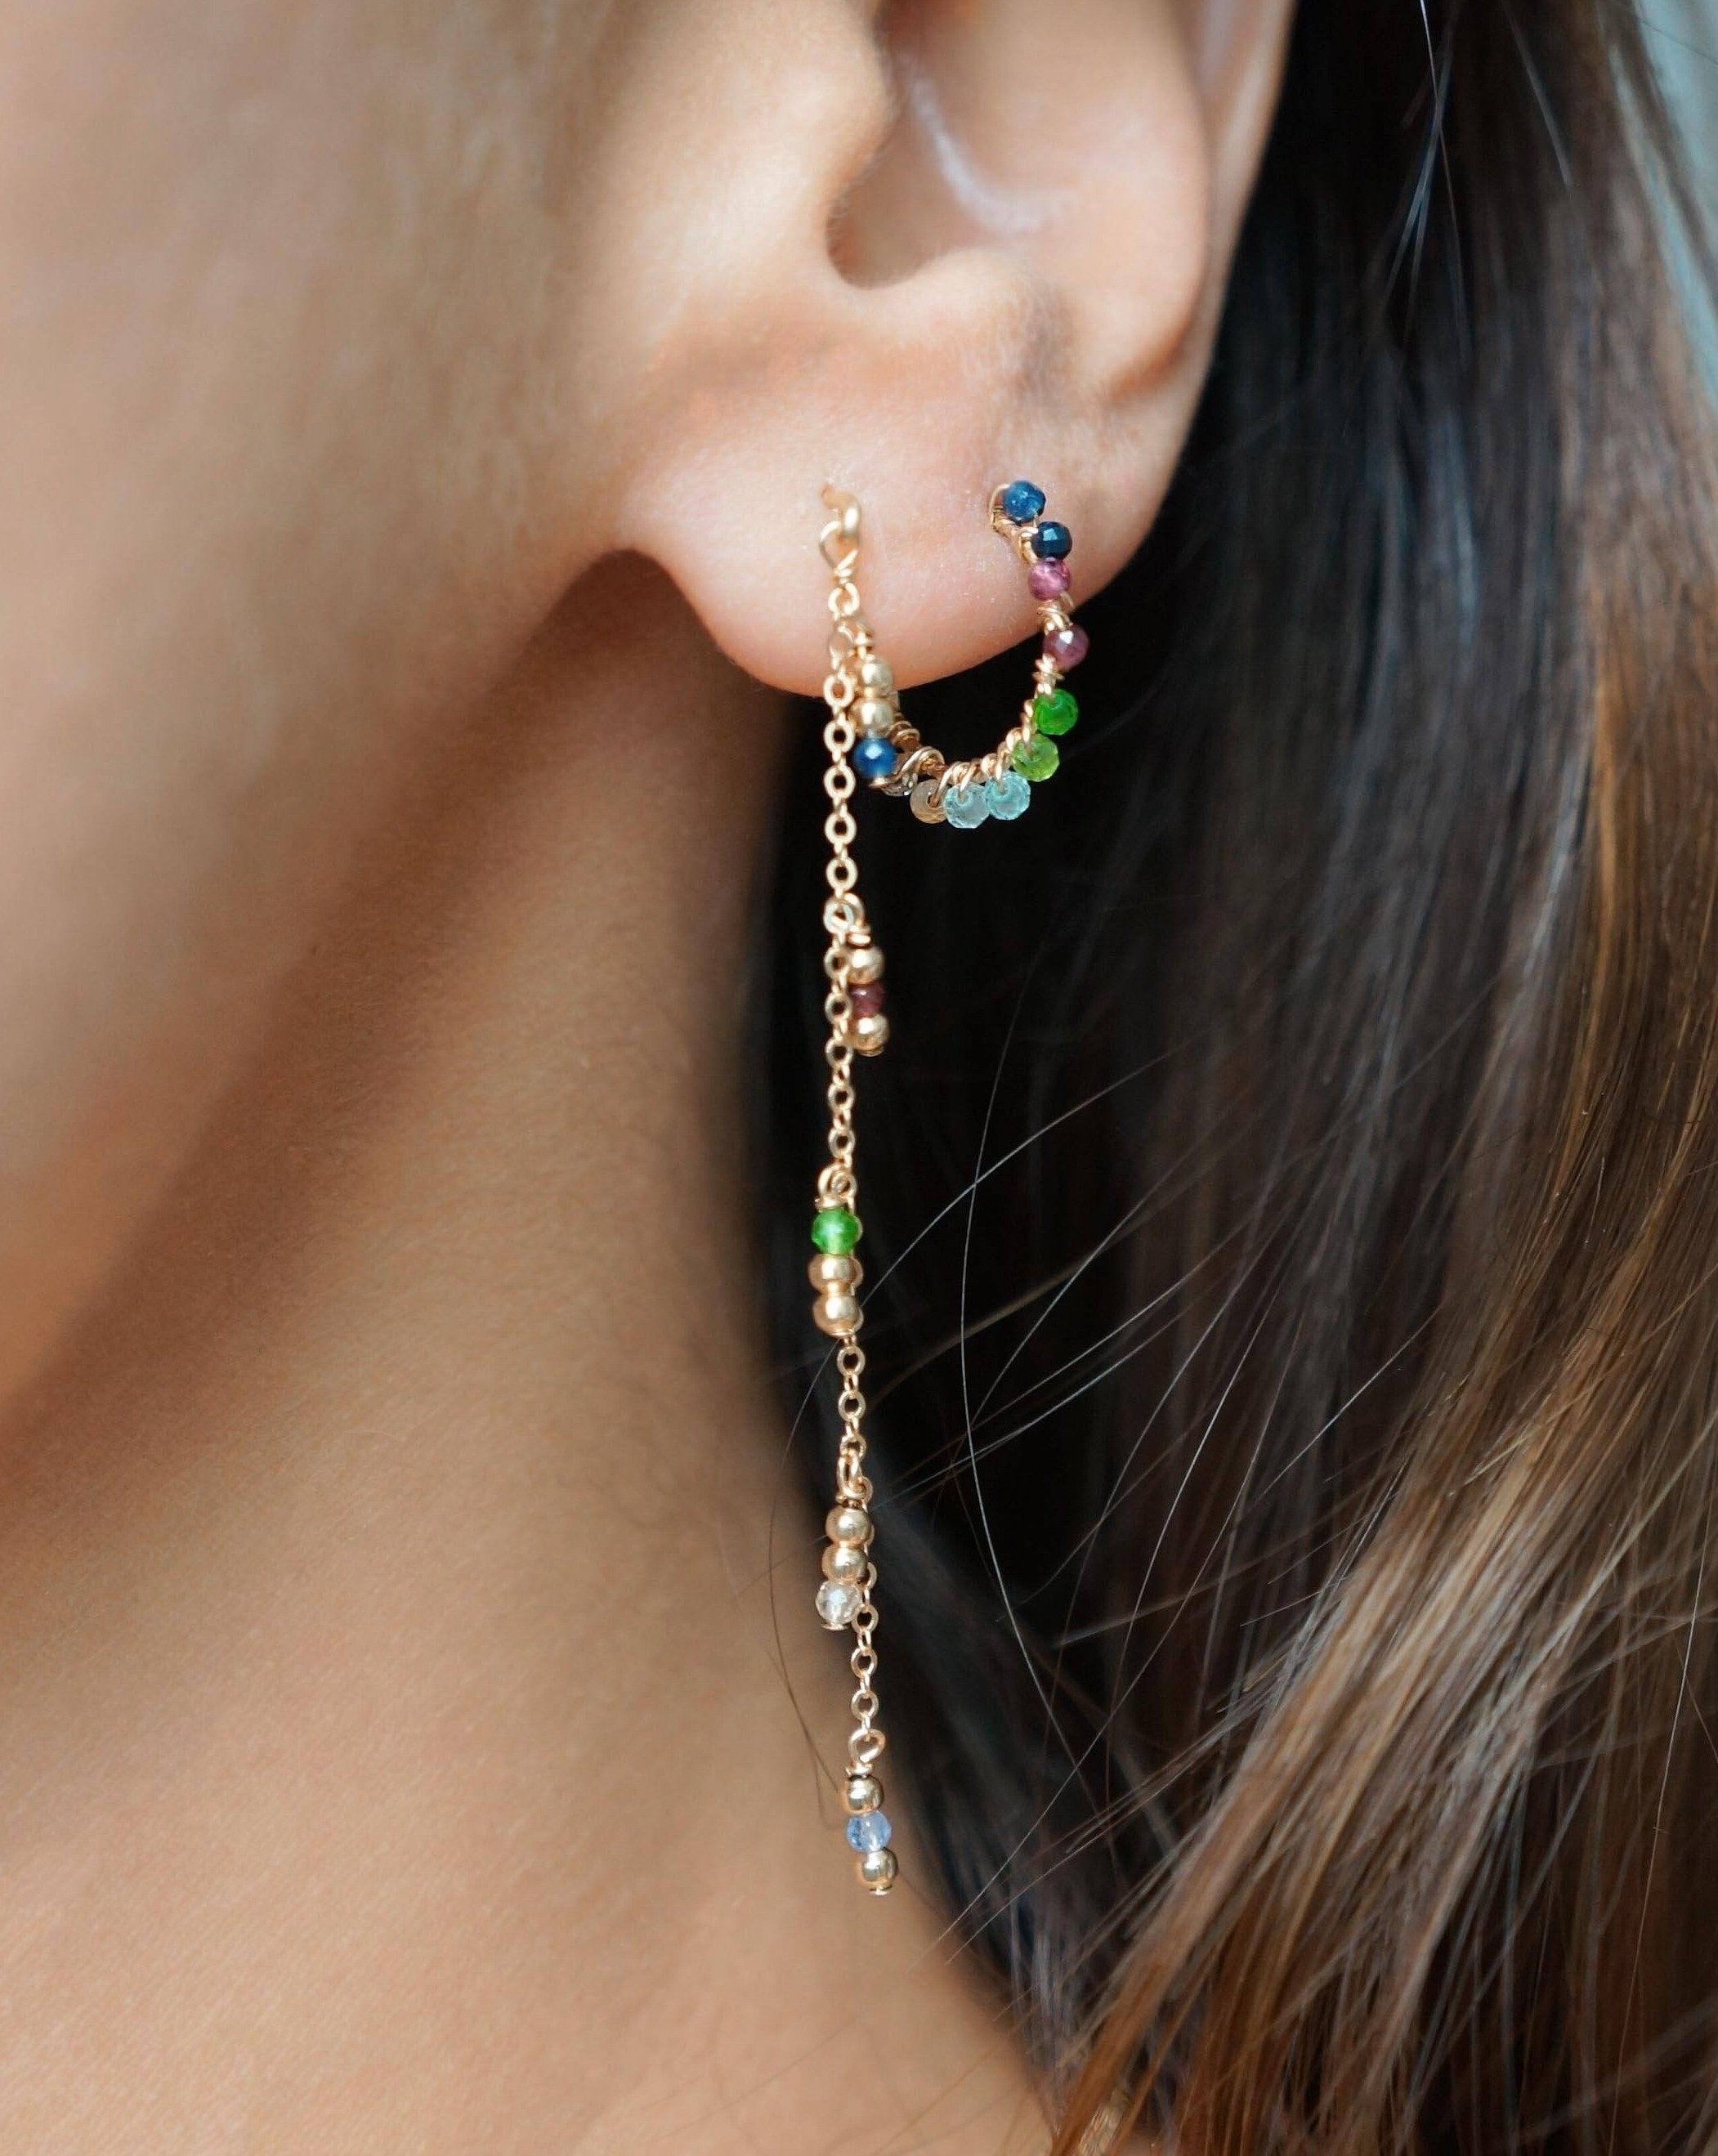 Samara Earrings by KOZAKH. Drop earrings, crafted in 14K Gold Filled, featuring 2mm Seamless gold beads and faceted 2mm Aquamarine, Garnet, Imperial Topaz, Emerald, Sapphire and Tanzanite.